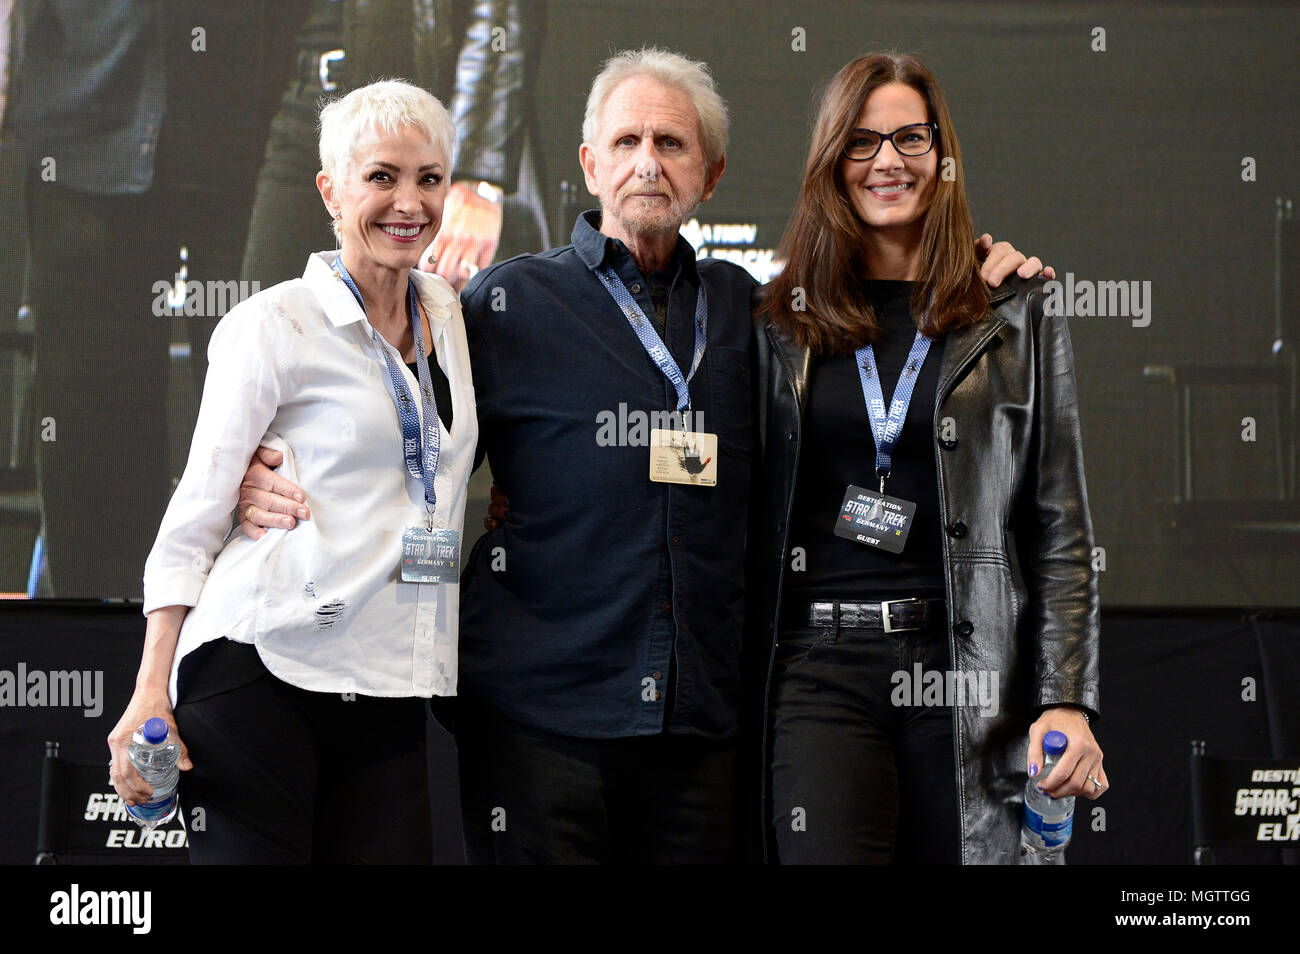 Dortmund, Germany. 27th Apr, 2018. Nana Visitor, Rene Auberjonis and Terry Farrell at the Destination Star Trek Germany Convention in the Westfalenhalle. Dortmund, 27.04.2018 | usage worldwide Credit: dpa picture alliance/Alamy Live News Stock Photo